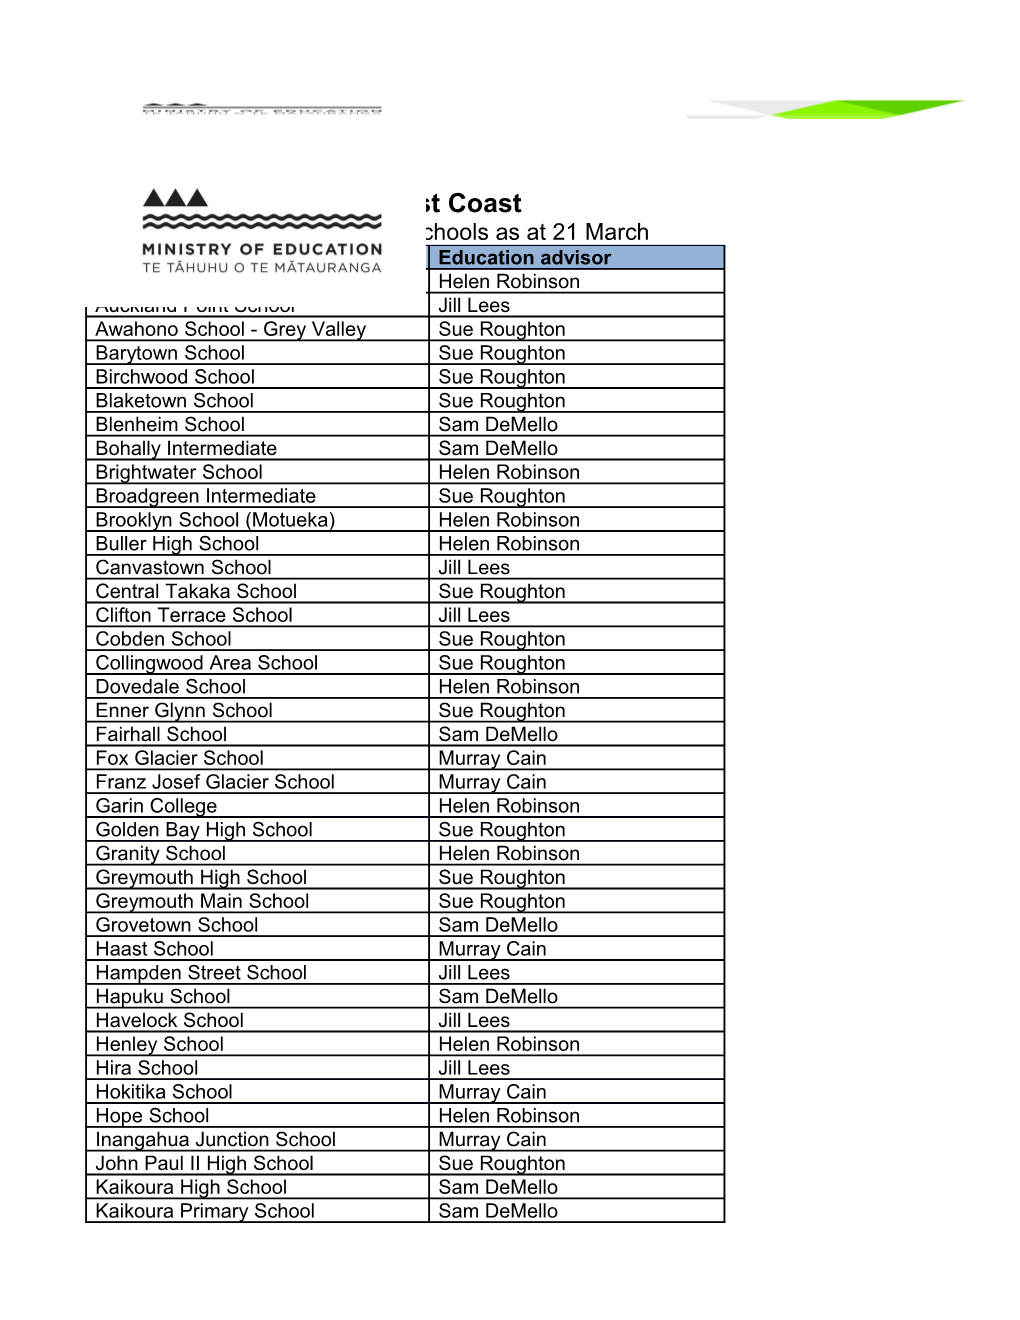 List of Education Advisors and Schools As at 21 March